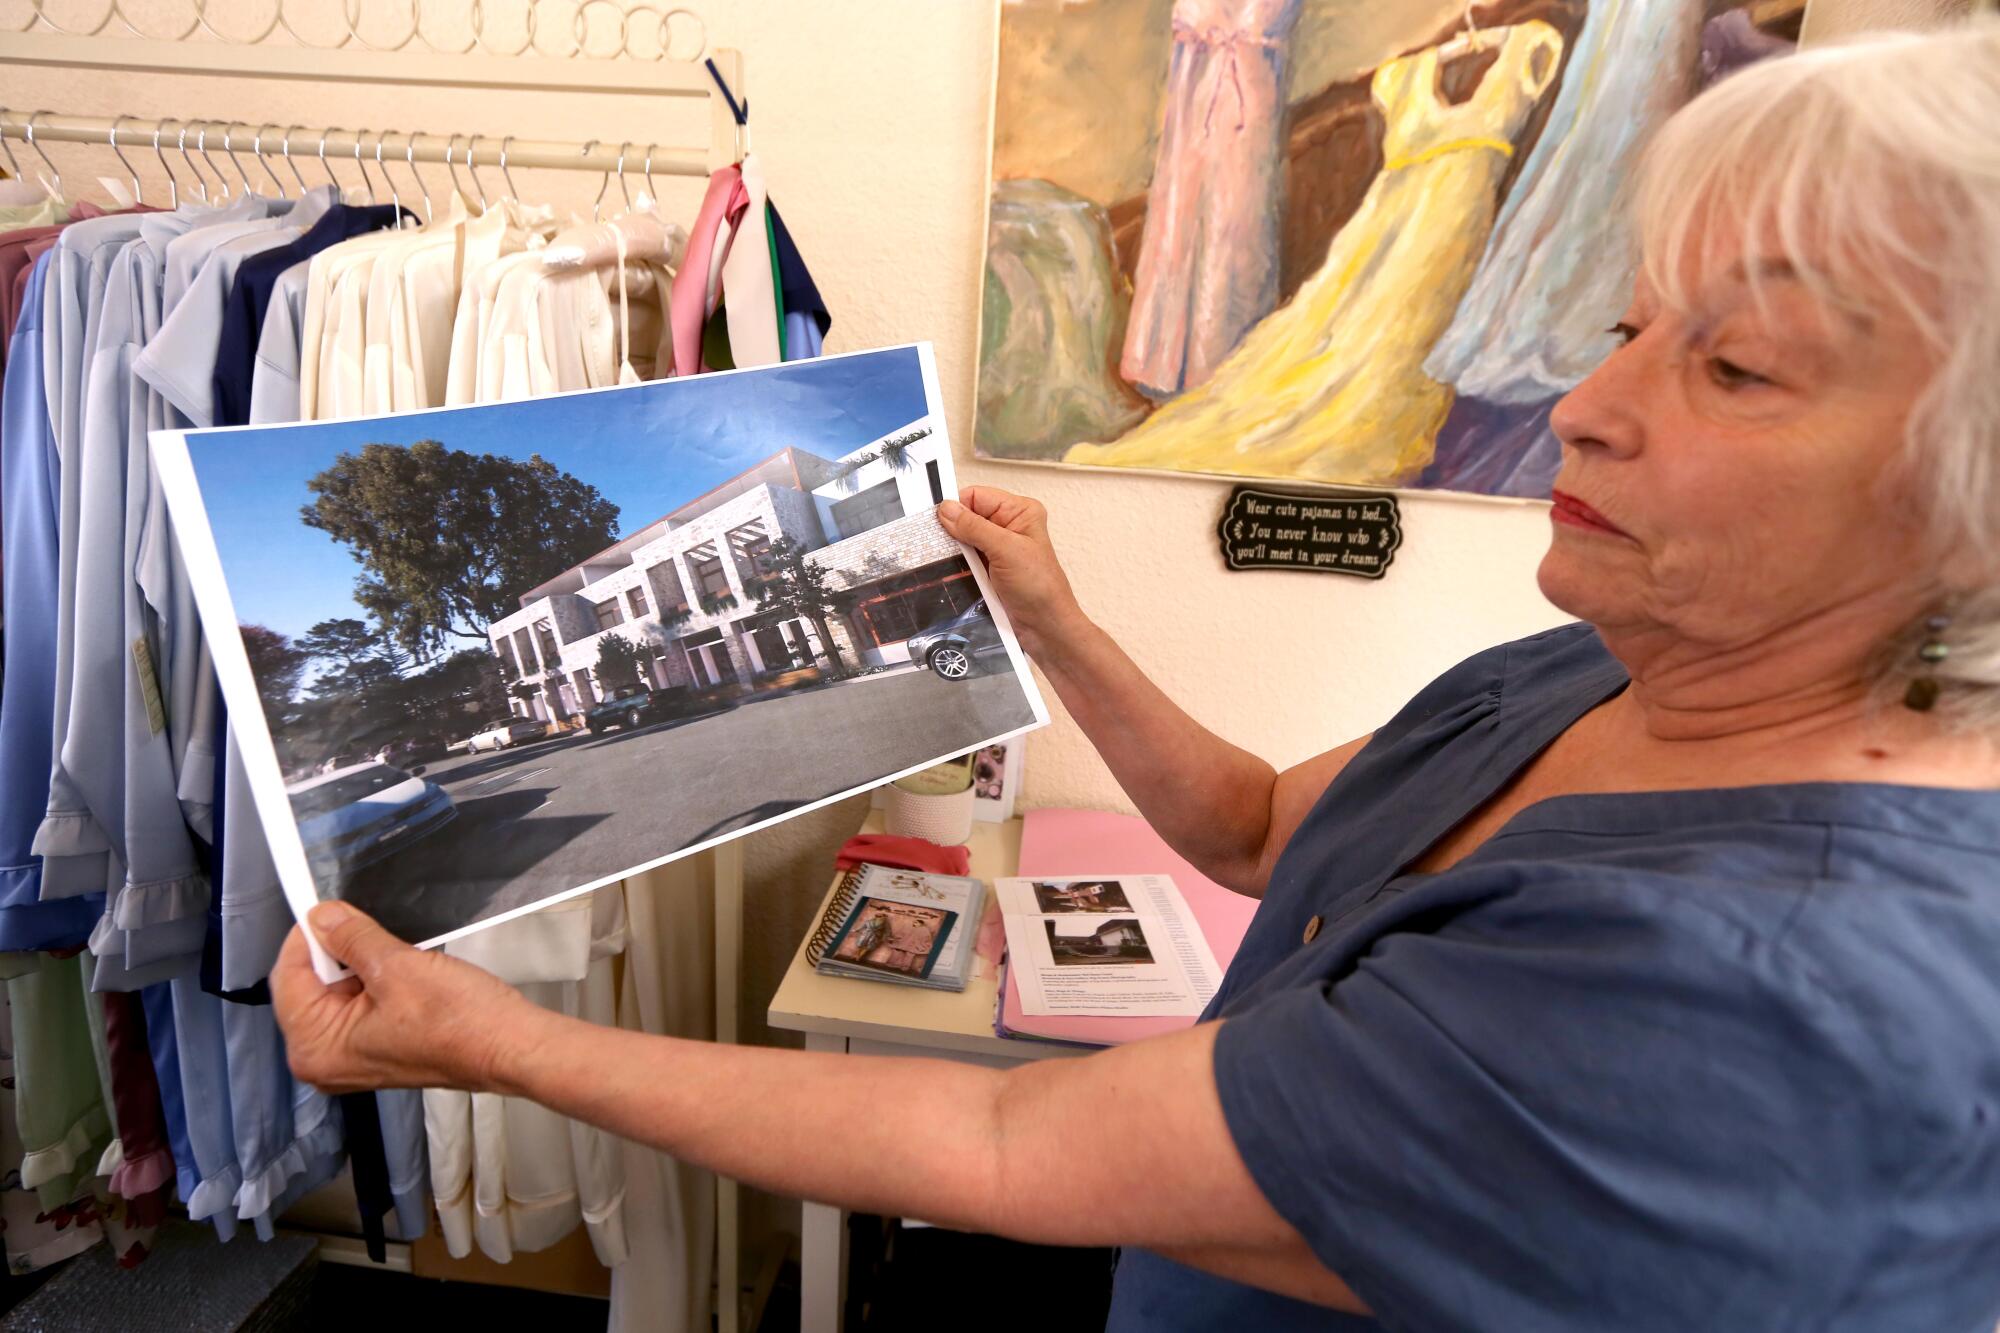 A woman holds up a proposed architectural design.